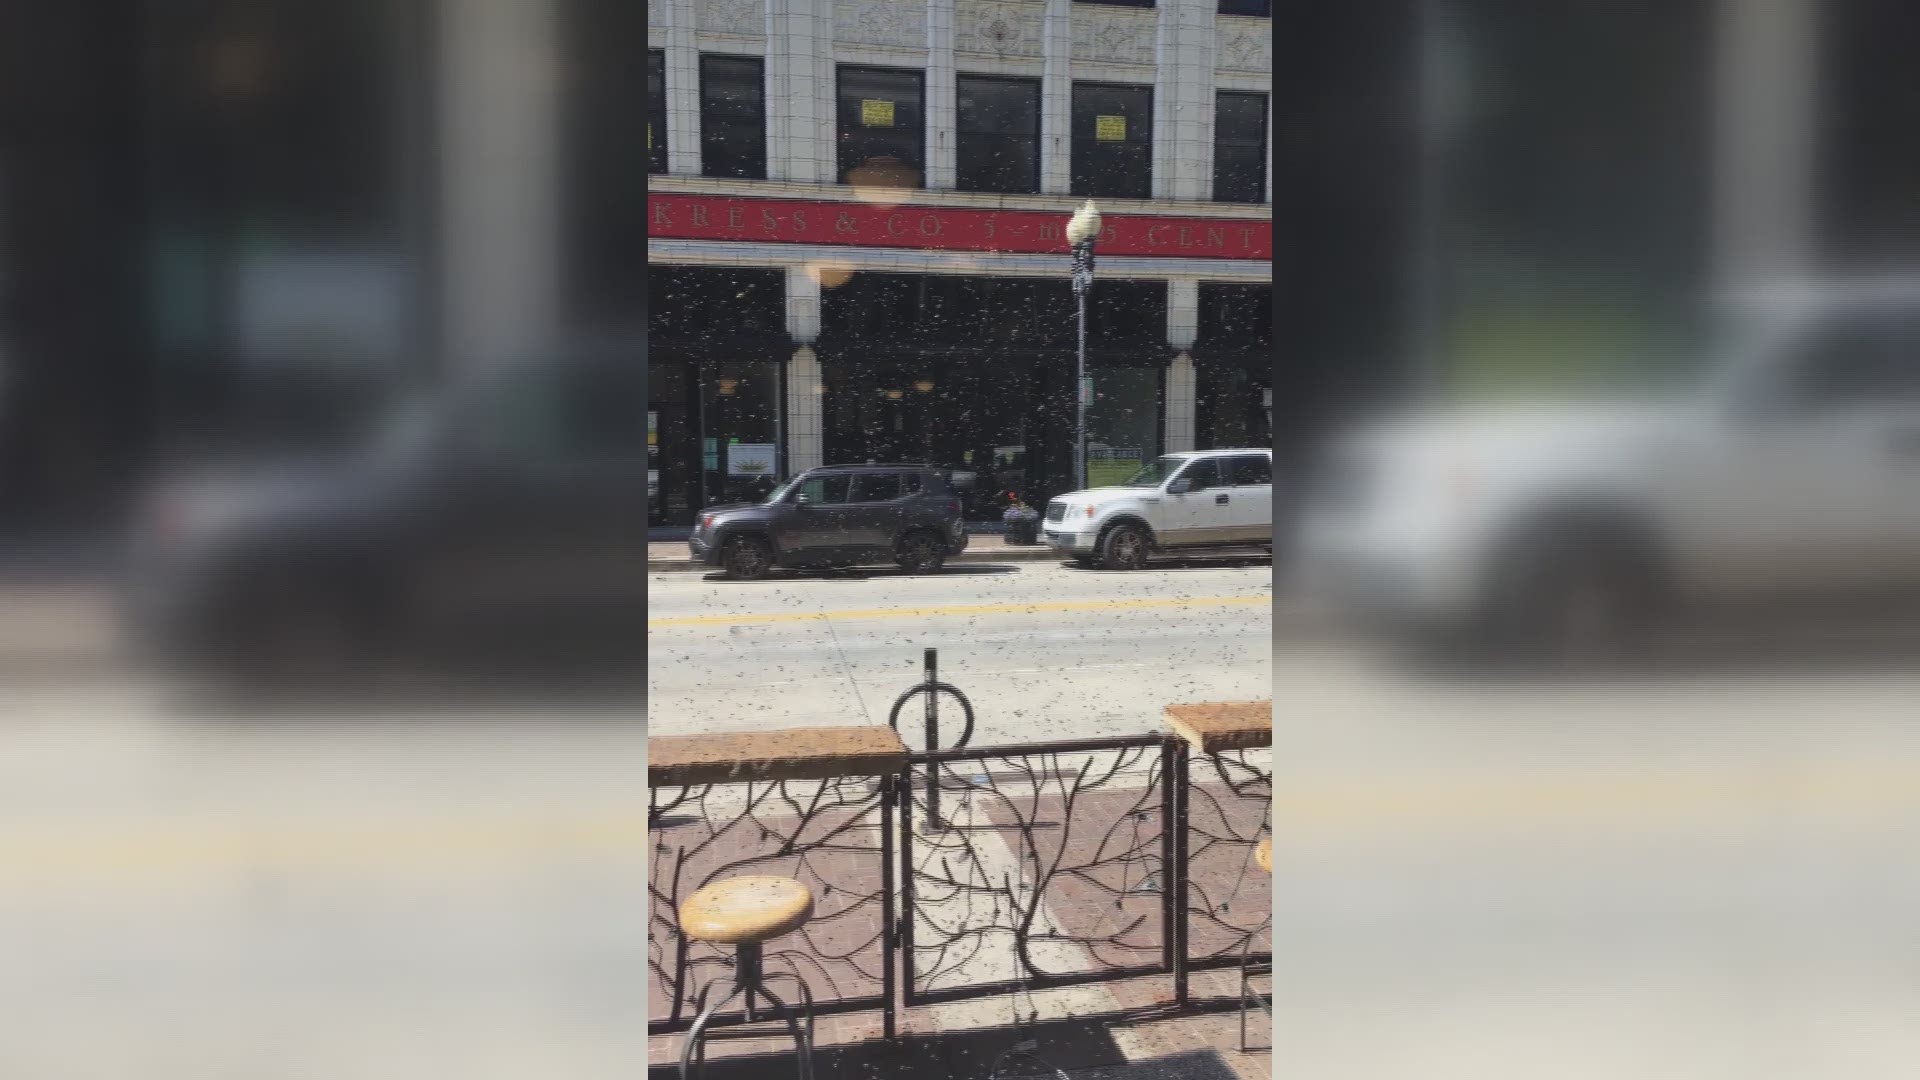 A swarm of bees took up residence on the patio of Phoenix Pharmacy, and became a downtown attraction.